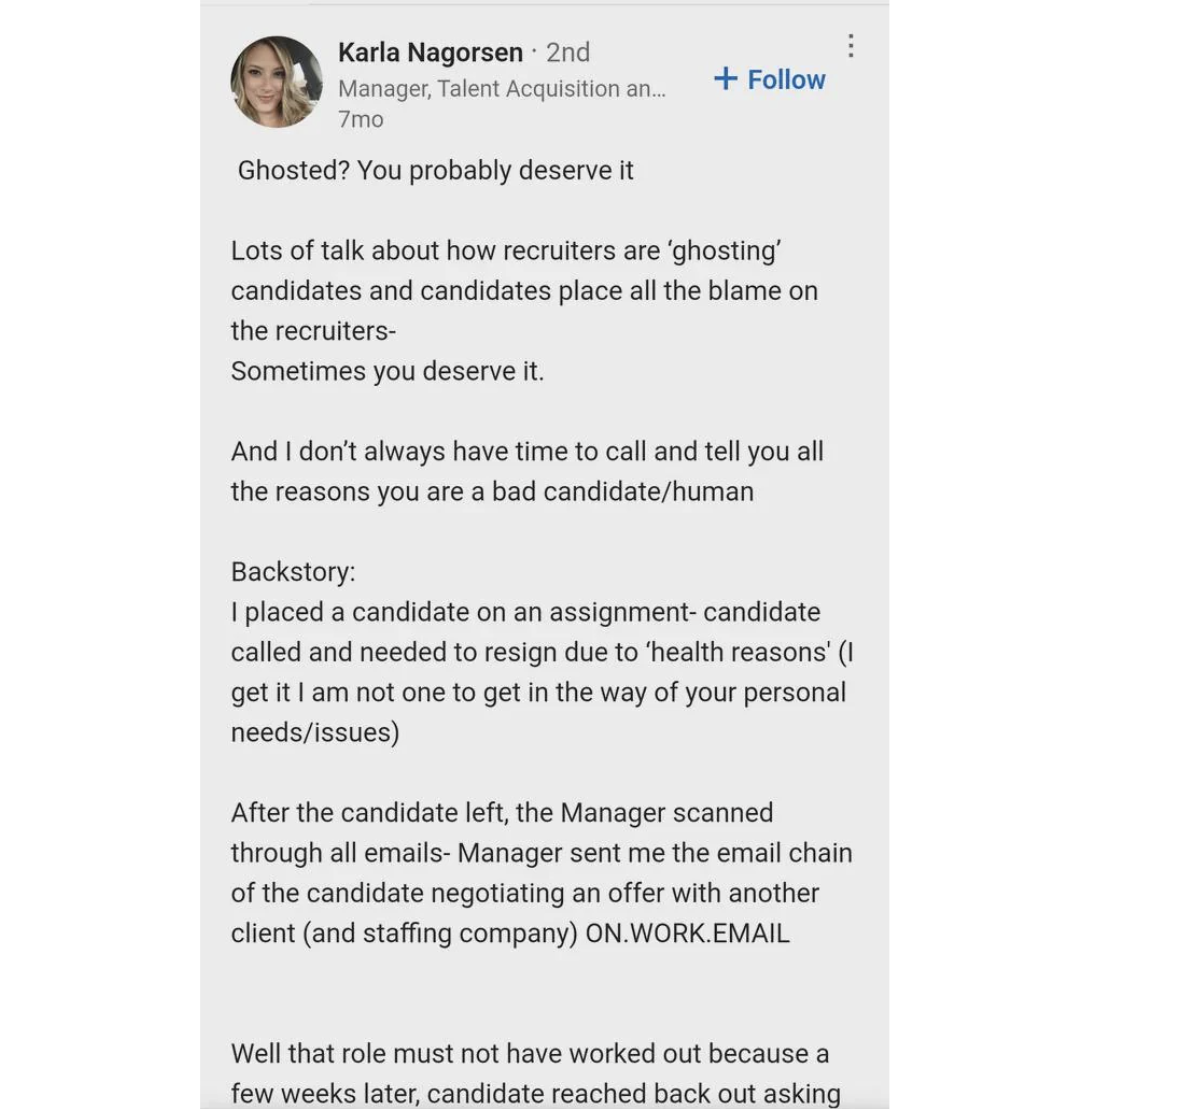 document - Karla Nagorsen 2nd Manager, Talent Acquisition an... 7mo Ghosted? You probably deserve it Lots of talk about how recruiters are 'ghosting" candidates and candidates place all the blame on the recruiters Sometimes you deserve it. And I don't alw